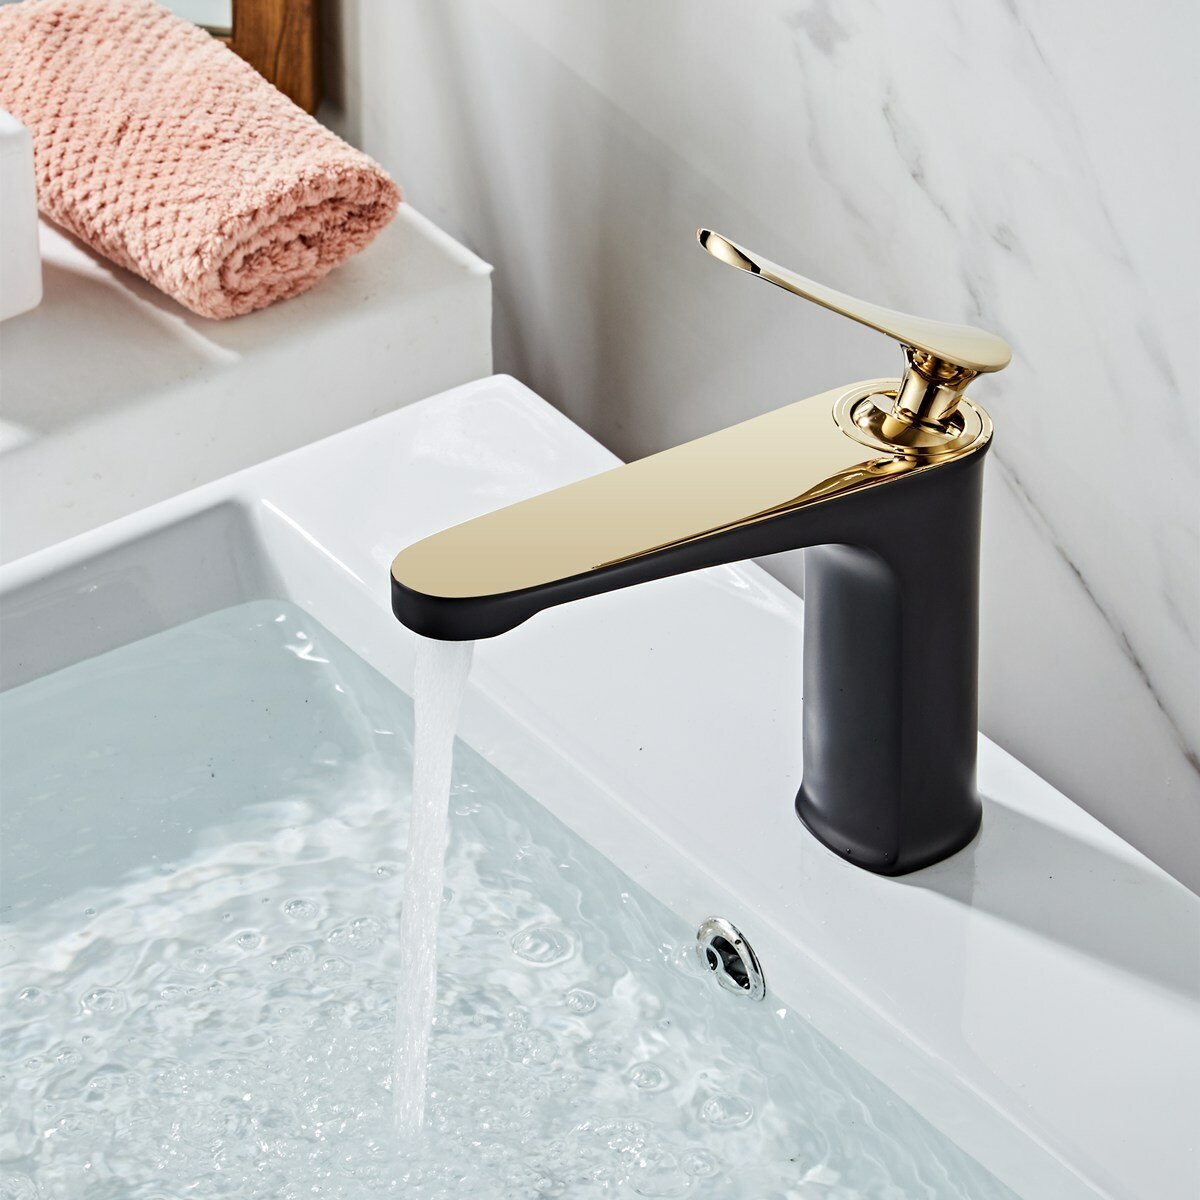 Image of Luxury Bathroom Basin Faucet Hot Cold Water Mixer Sink Tap Gold Polished Handle Single Handle Brass Faucet